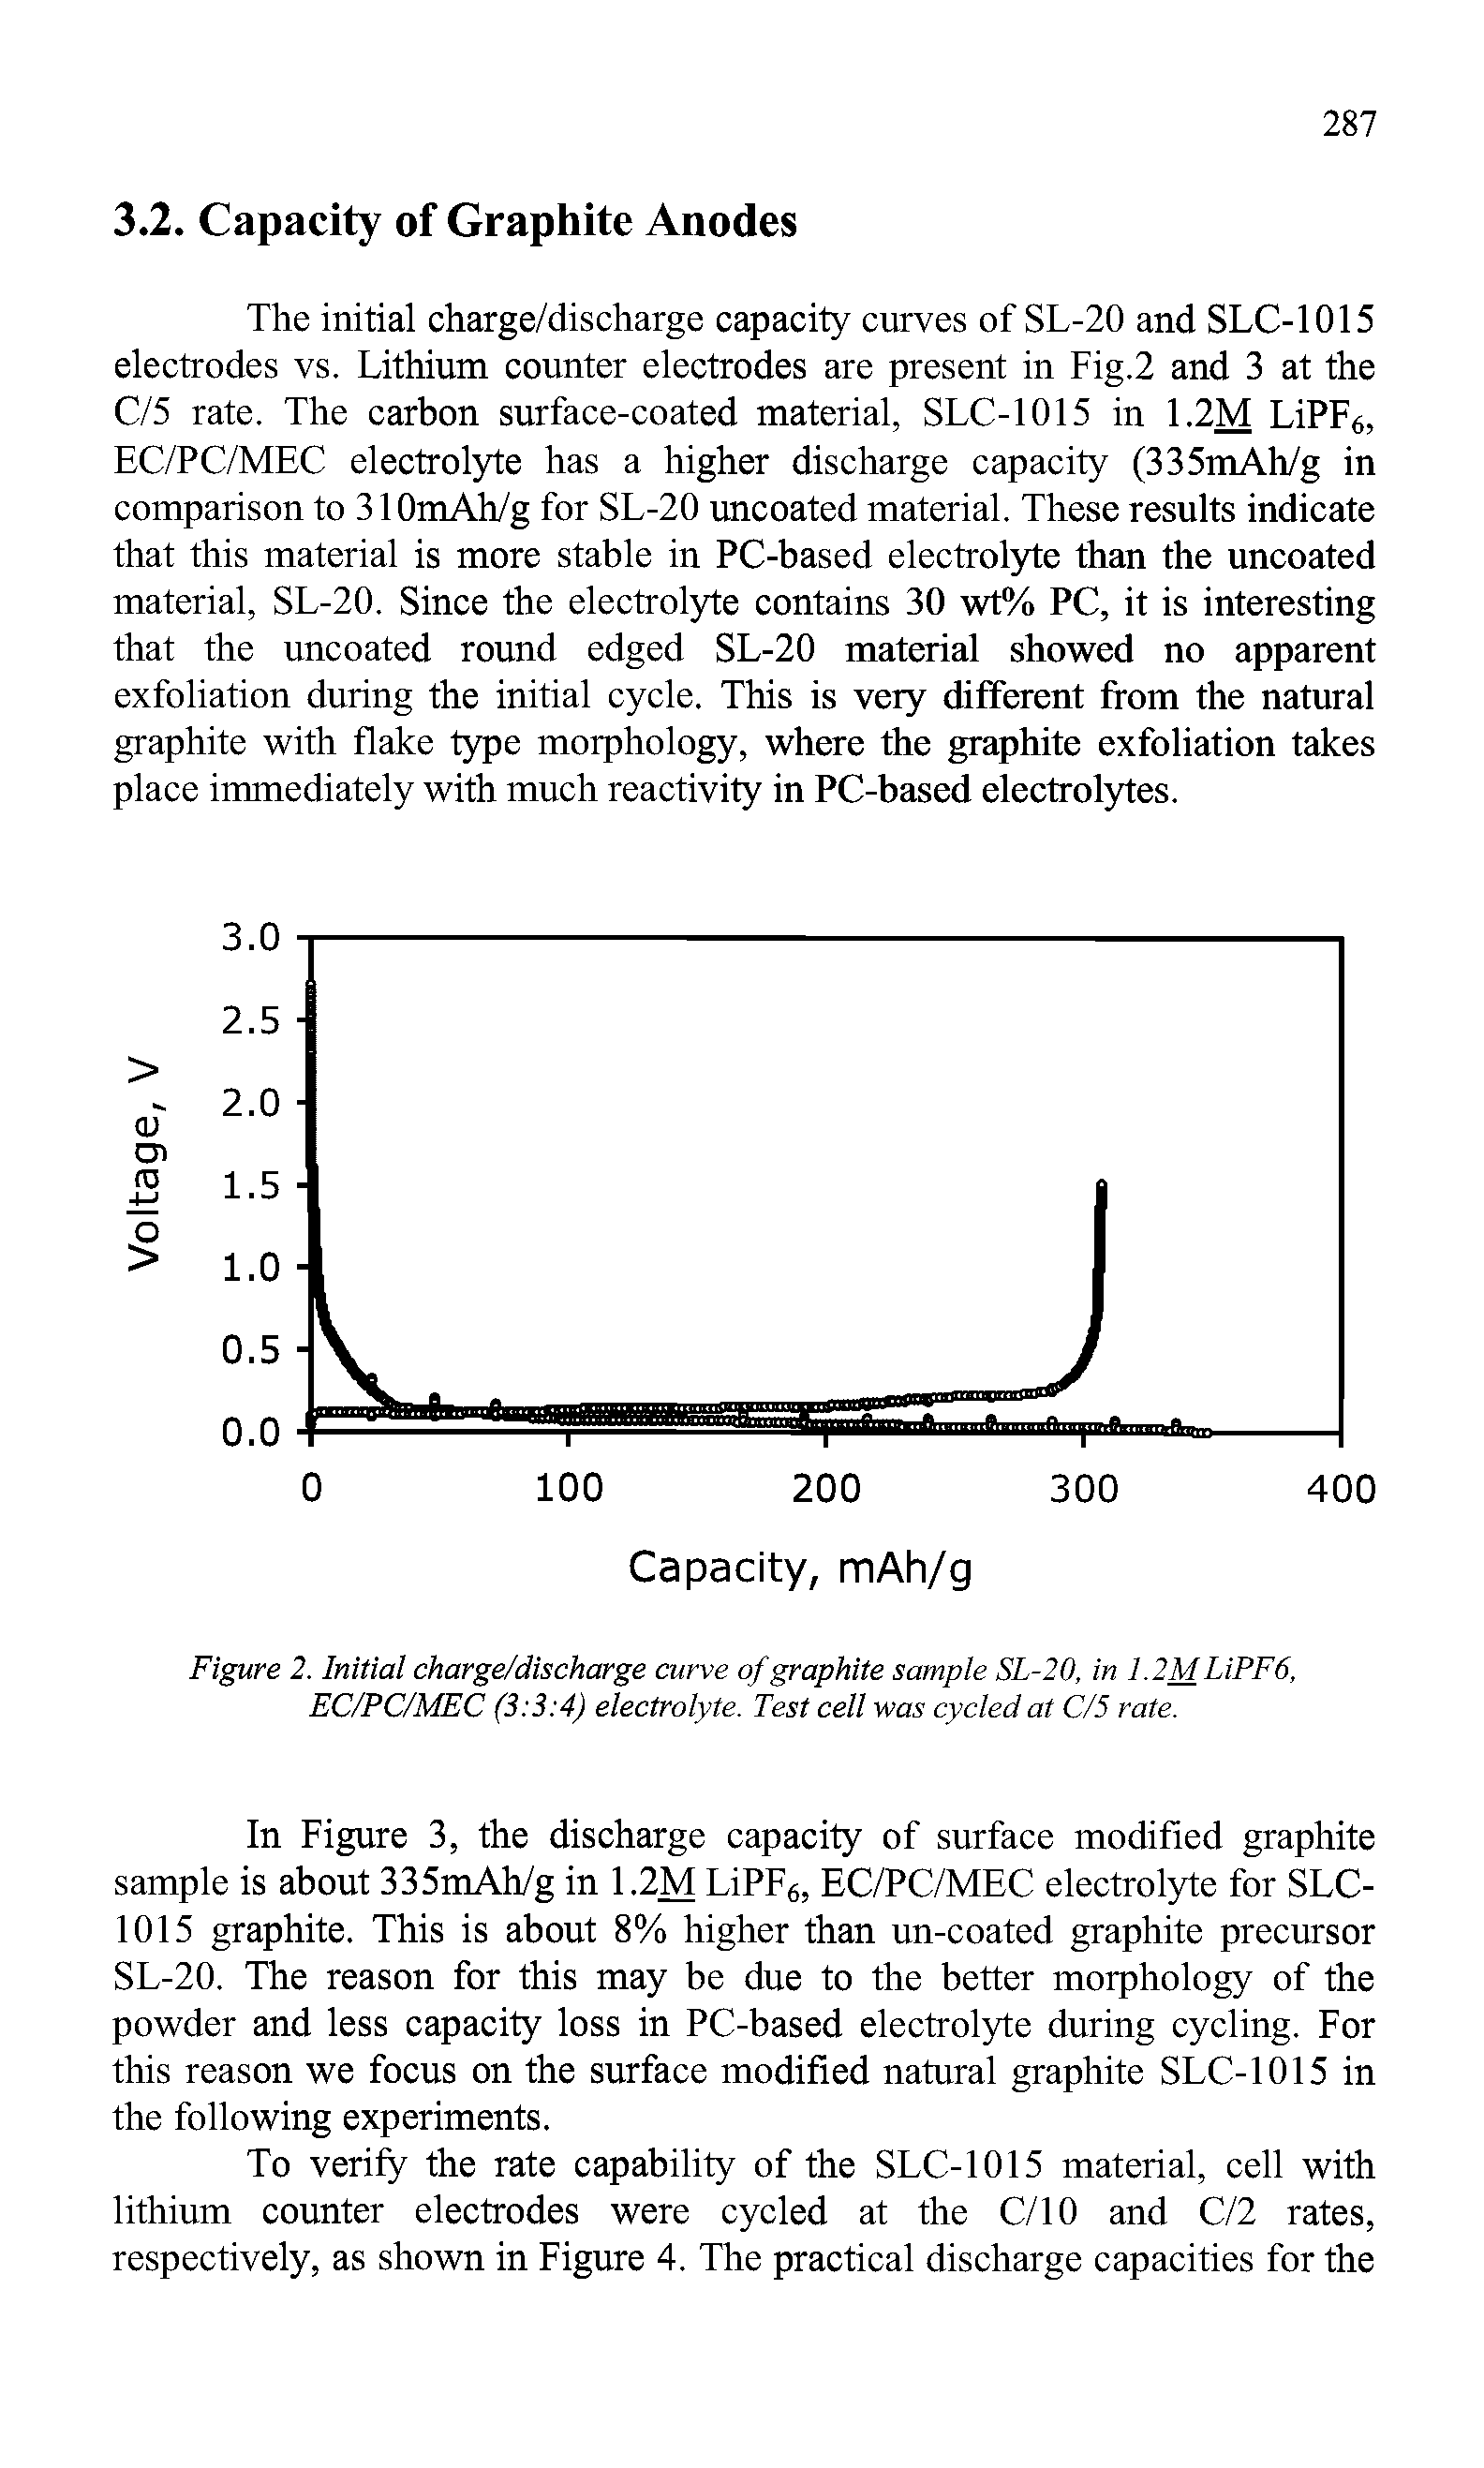 Figure 2. Initial charge/discharge curve of graphite sample SL-20, in 1.2MLiPF6, EC/PC/MEC (3 3 4) electrolyte. Test cell was cycled at C/5 rate.